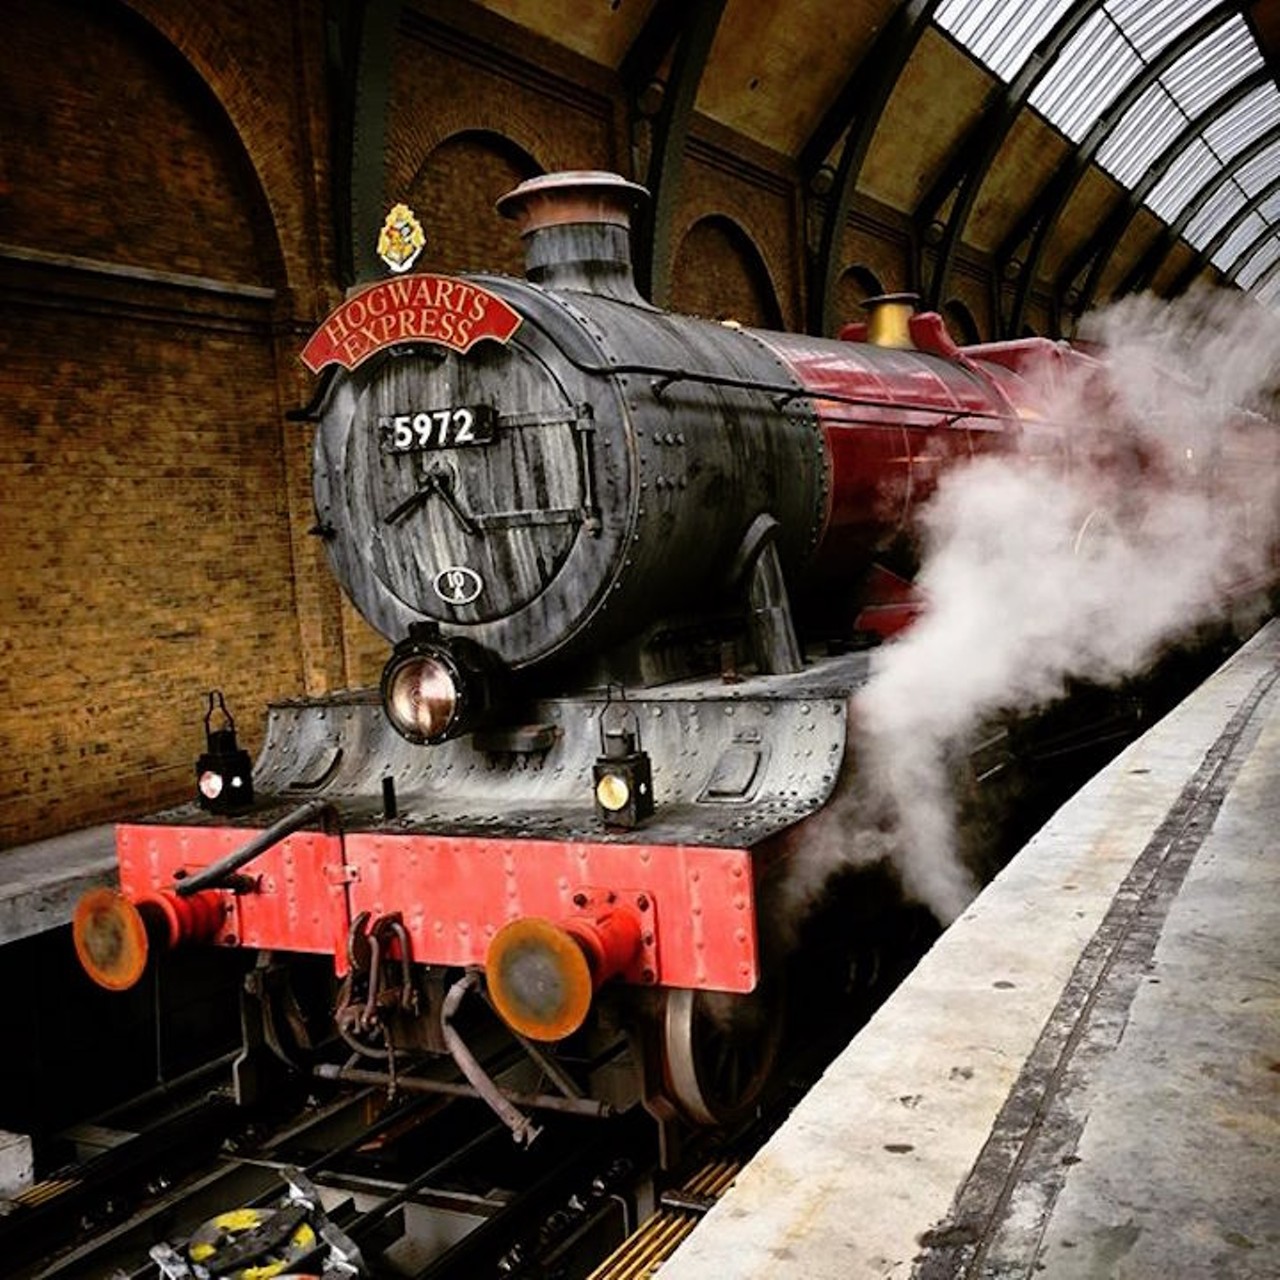 13. While riding the Hogwarts Express
No one can see you two go for it if you get a cabin all to yourselves. You're a wizard now, Harry. 
Photo via _meglep/Instagram